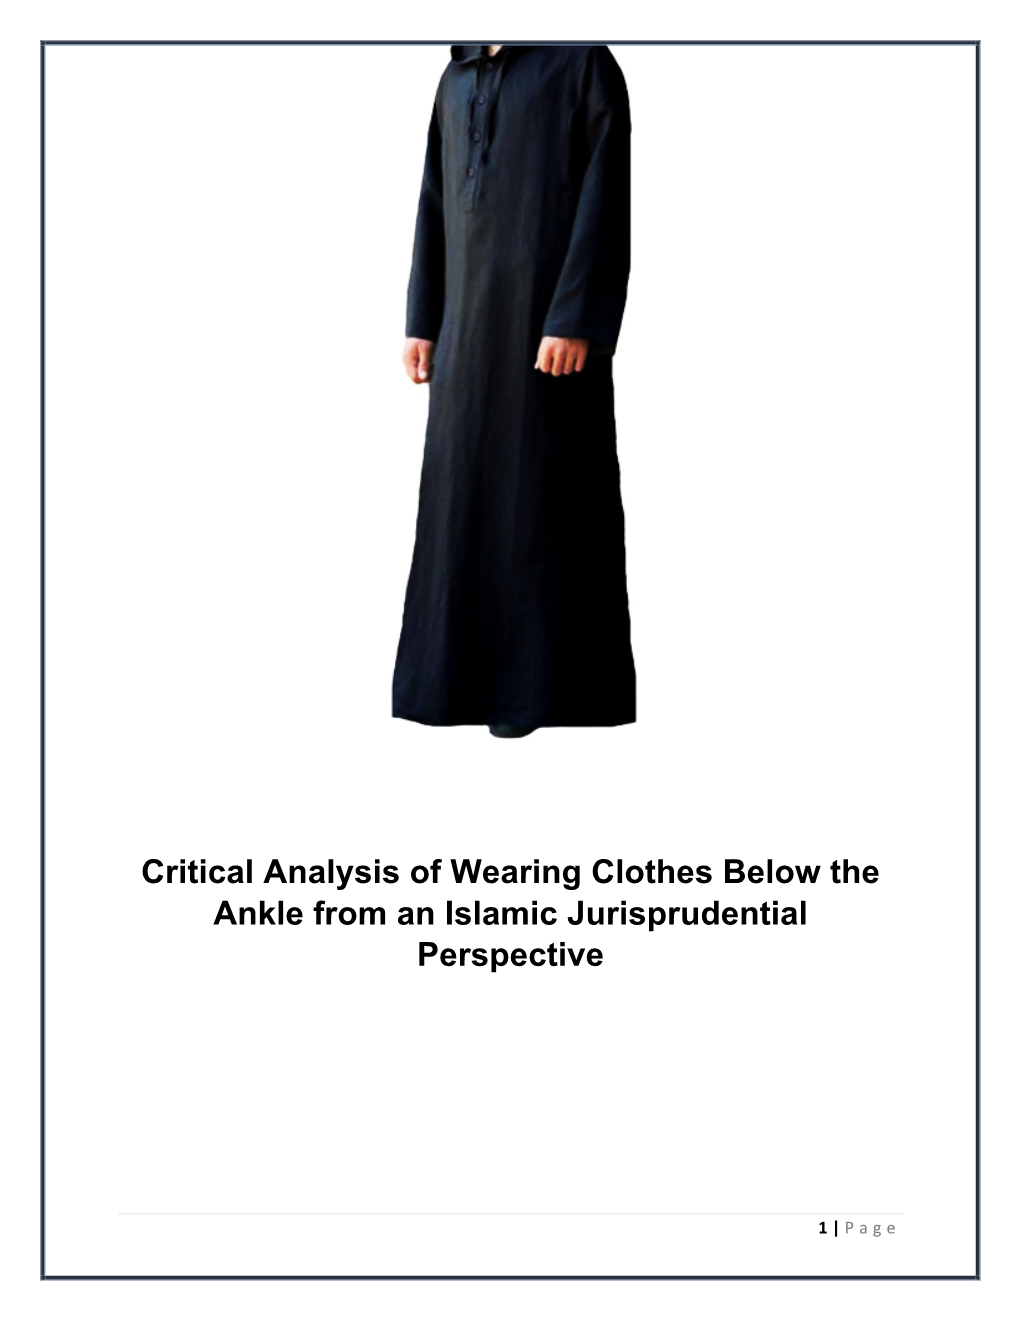 Critical Analysis of Wearing Clothes Below the Ankle from an Islamic Jurisprudential Perspective